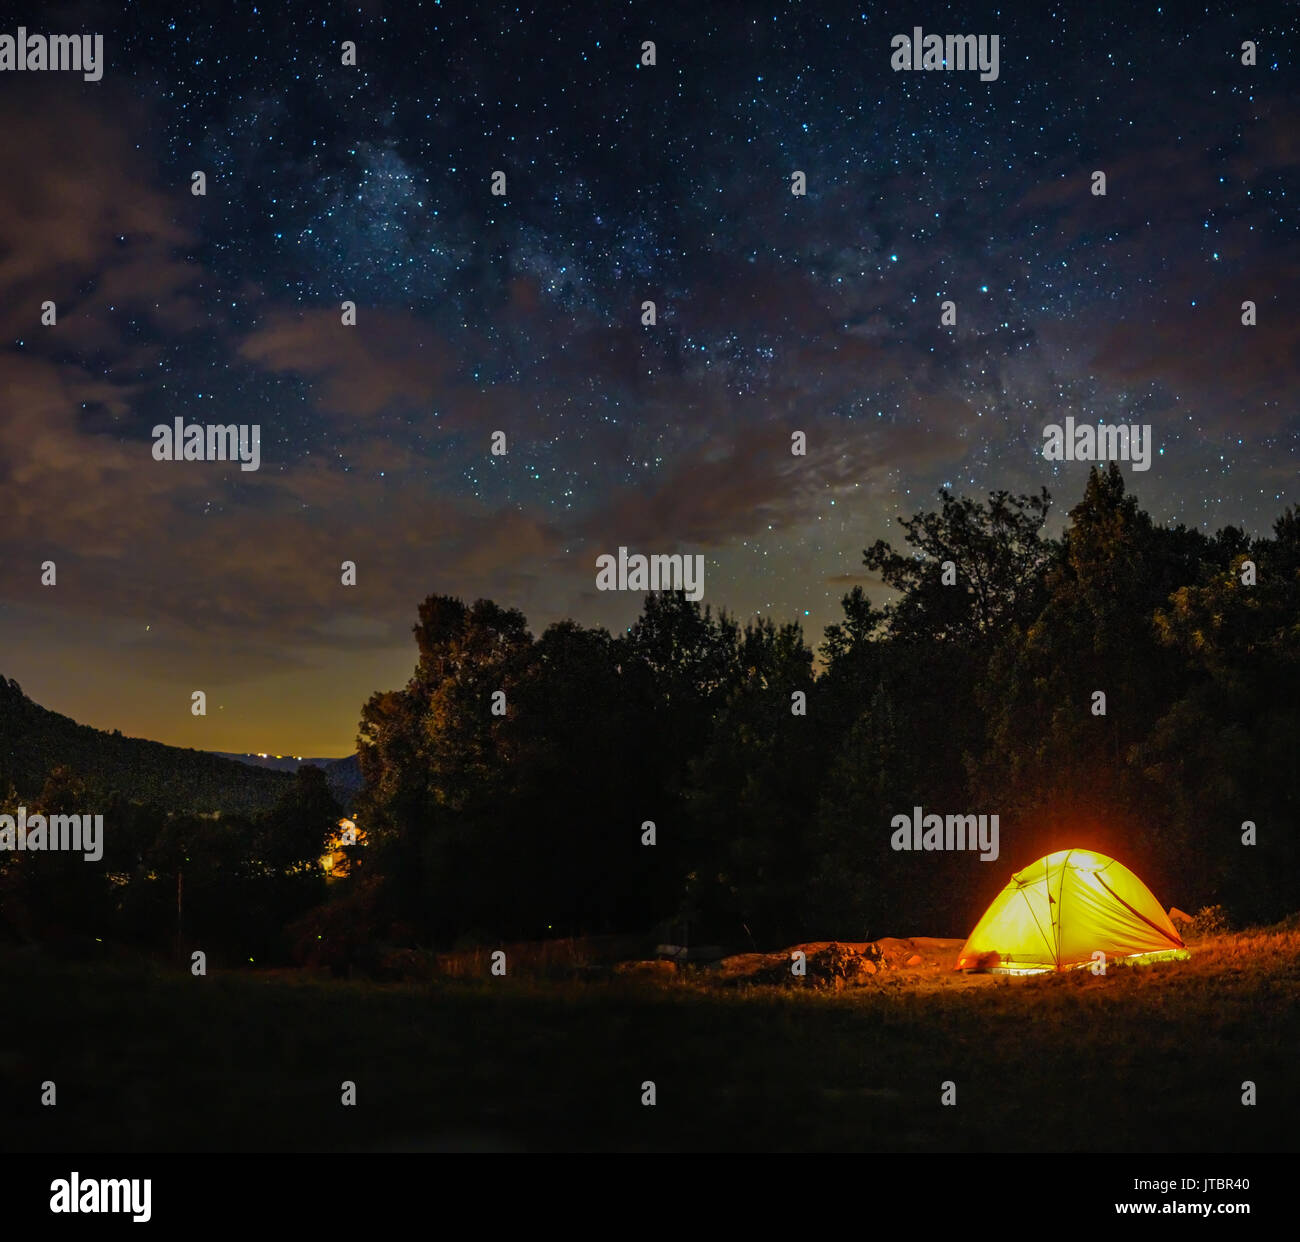 A camping tent under milky way sky and twilight at night Stock Photo